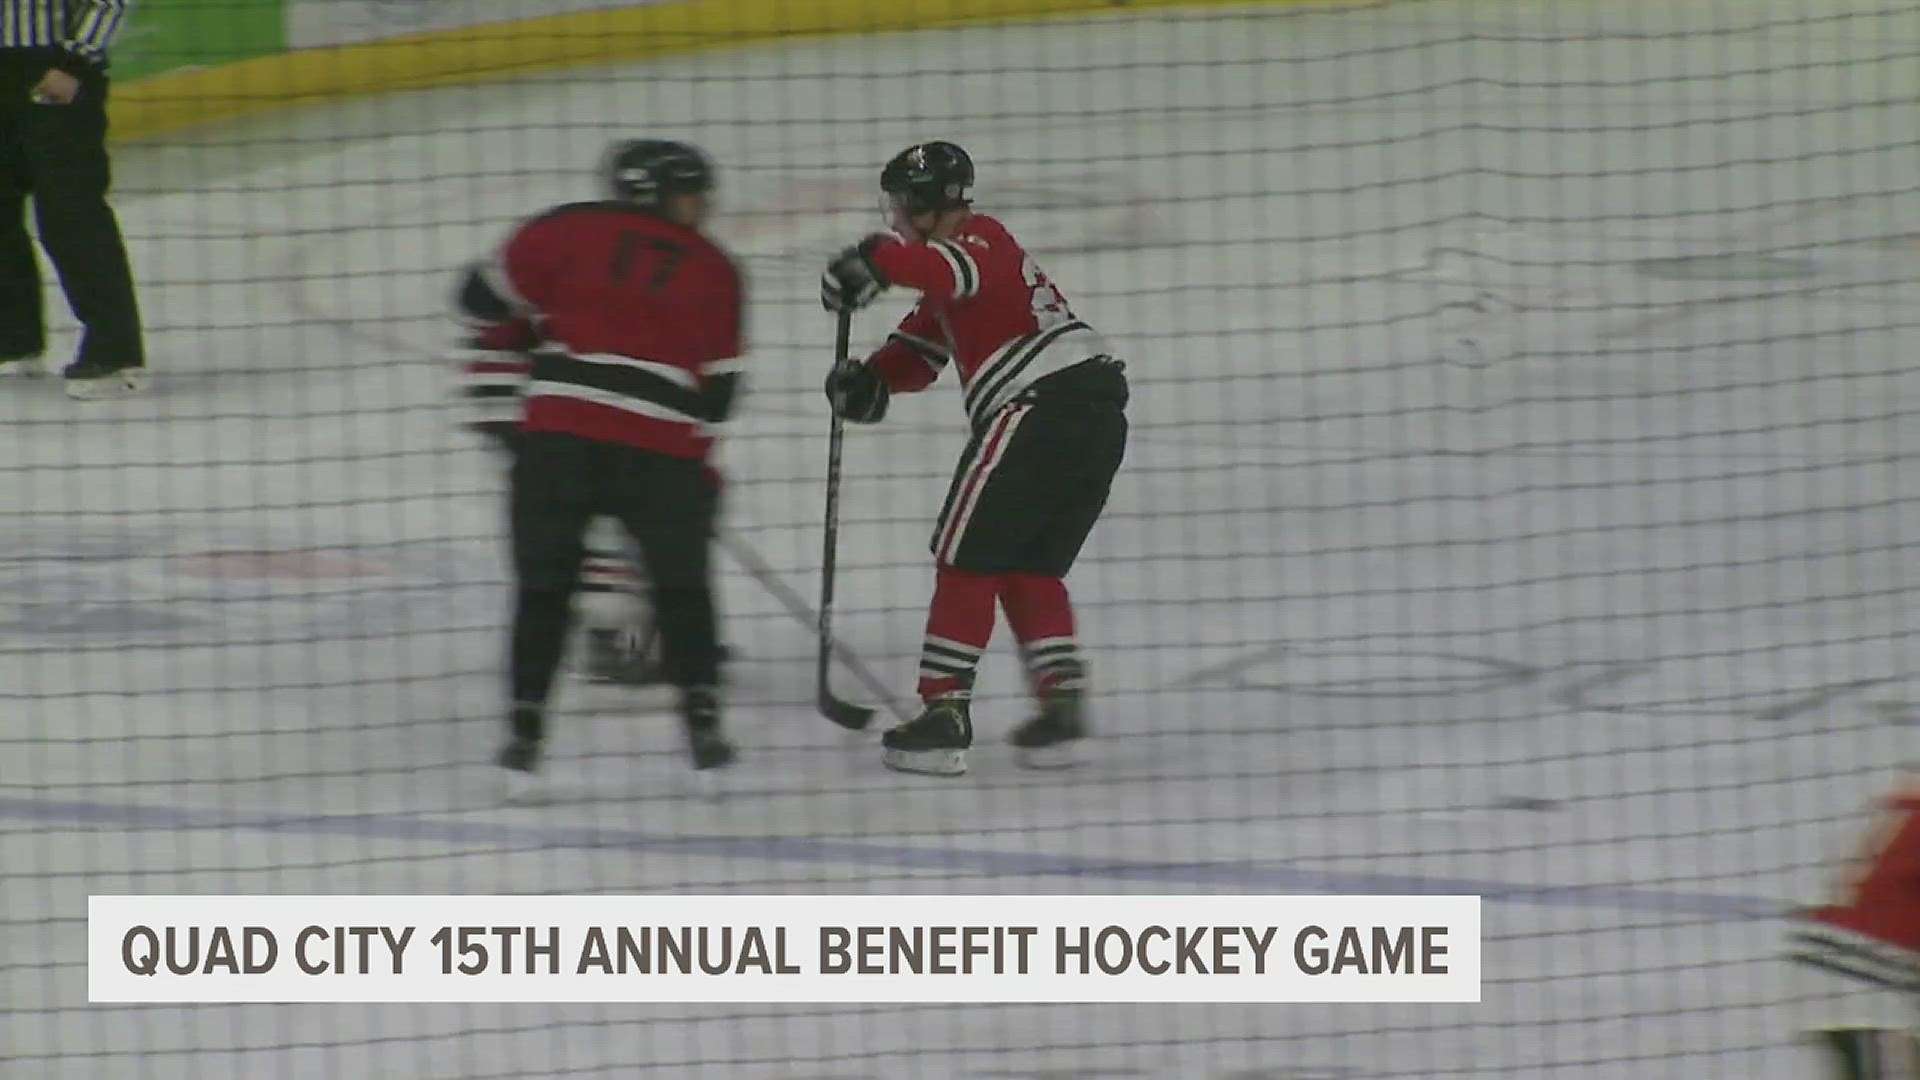 Benefits from the game will go towards two Quad City officers